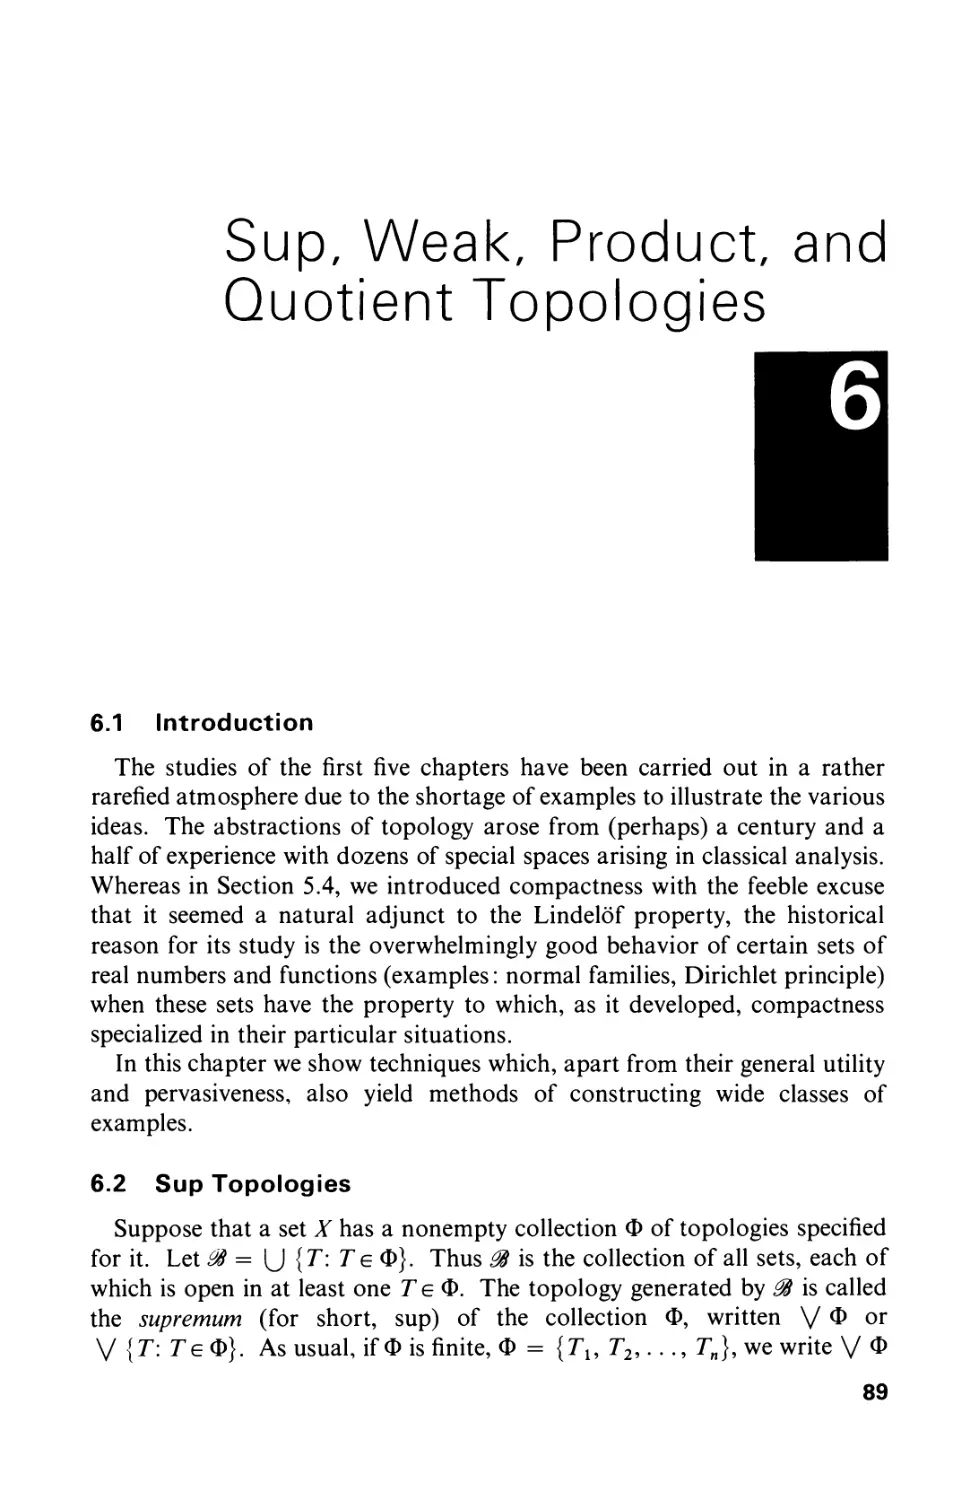 6 Sup, Weak, Product, and Quotient Topologies  89
6.2 Sup topologies  89